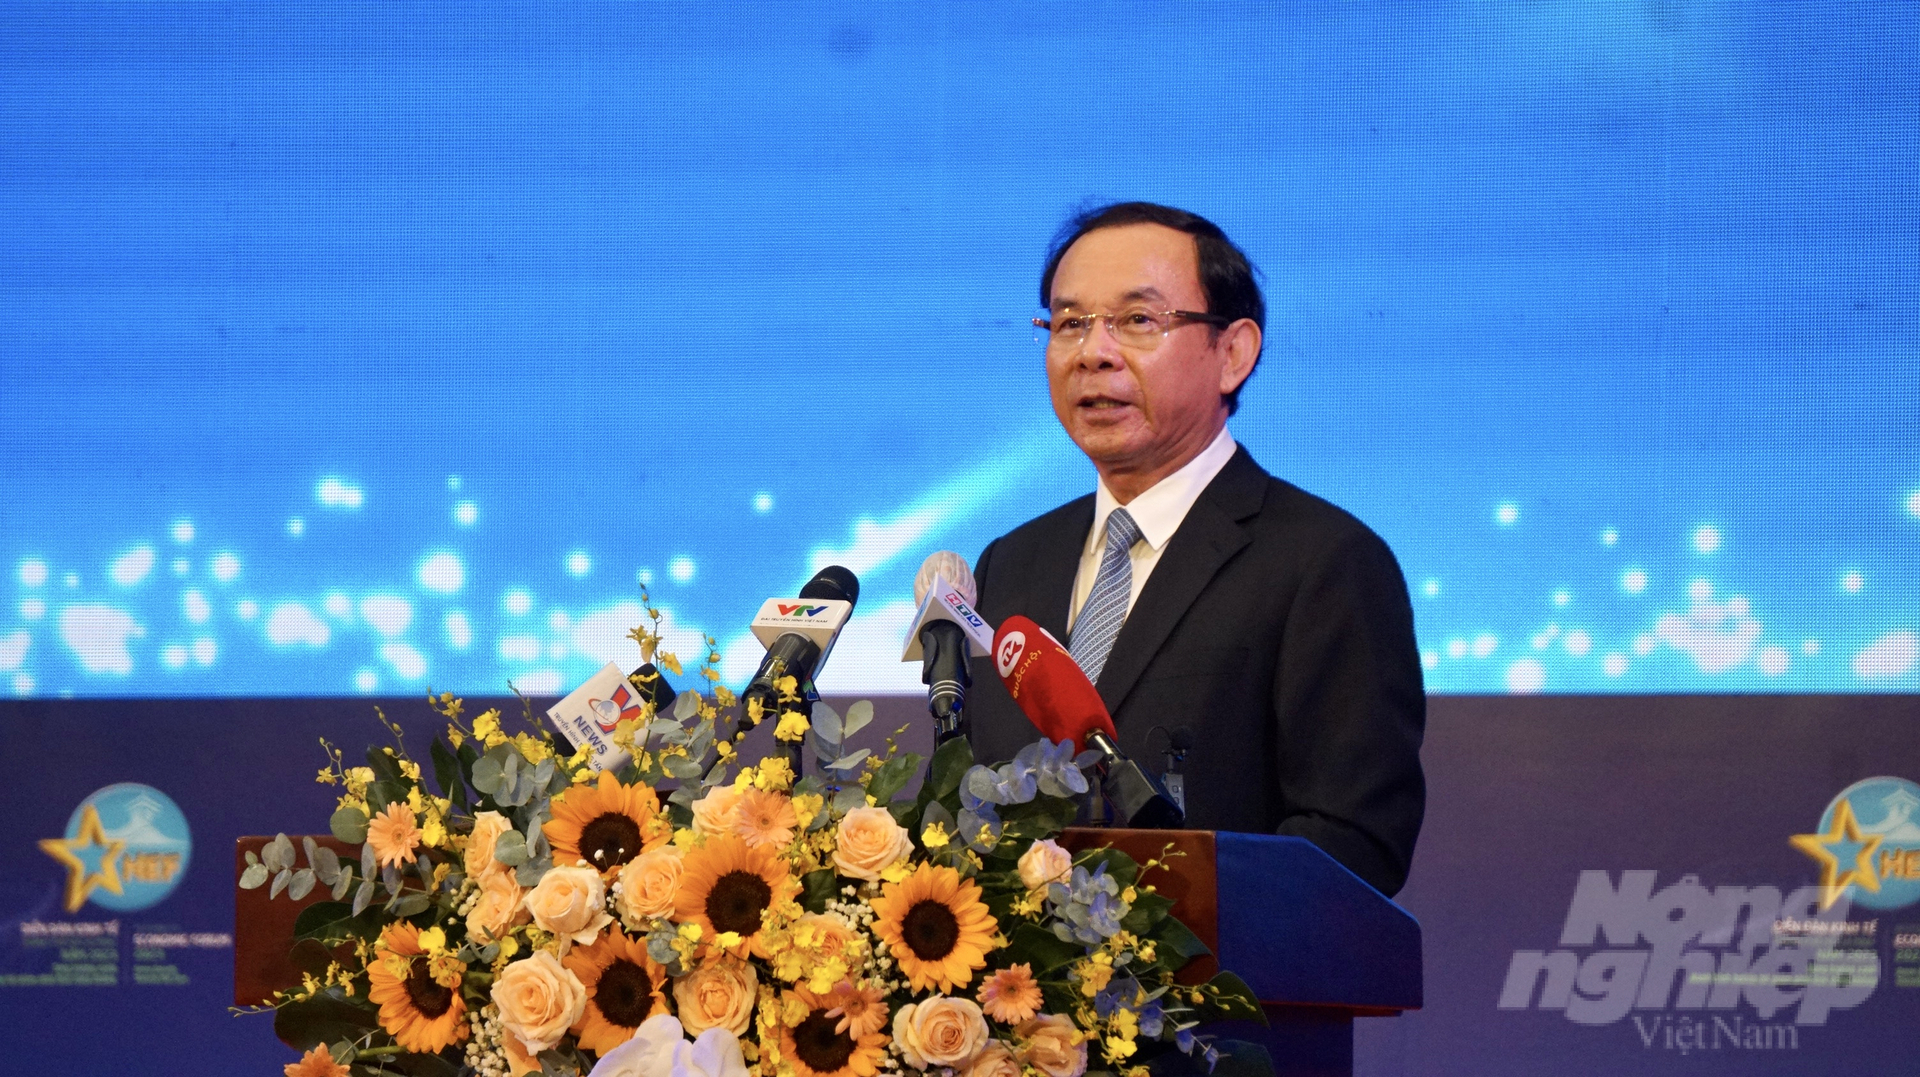 Secretary of Ho Chi Minh City Party Committee Nguyen Van Nen delivered a speech at the opening of HEF Forum 2023. Photo: Nguyen Thuy.